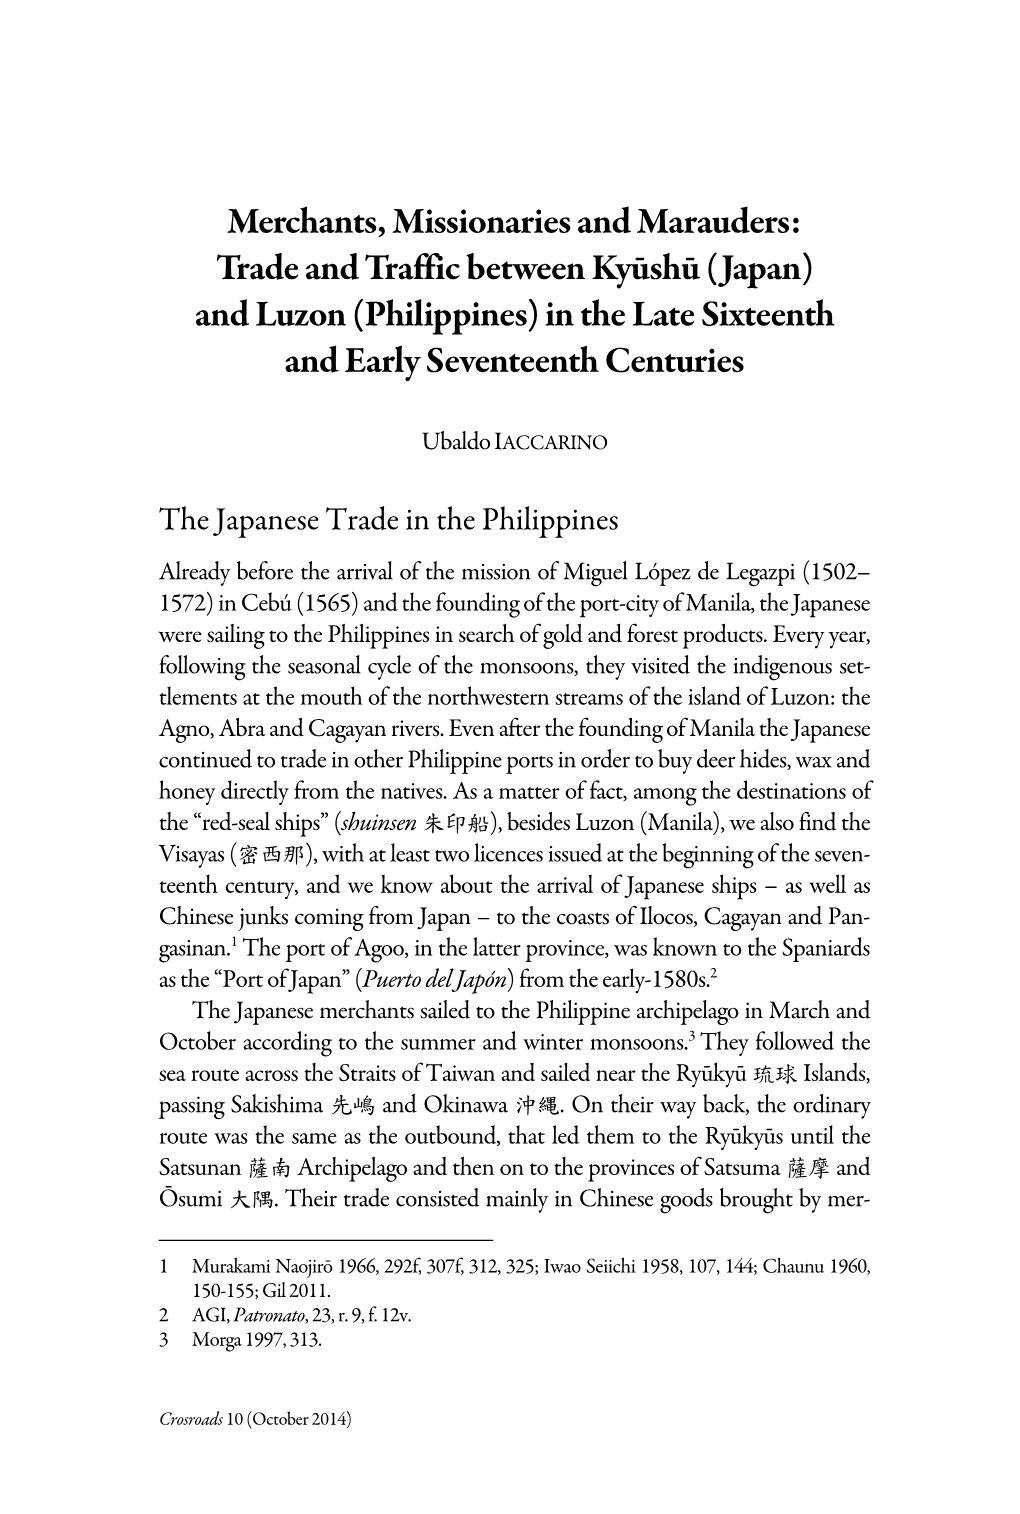 Merchants, Missionaries and Marauders: Trade and Traffic Between Kyūshū ( Japan) and Luzon (Philippines) in the Late Sixteent